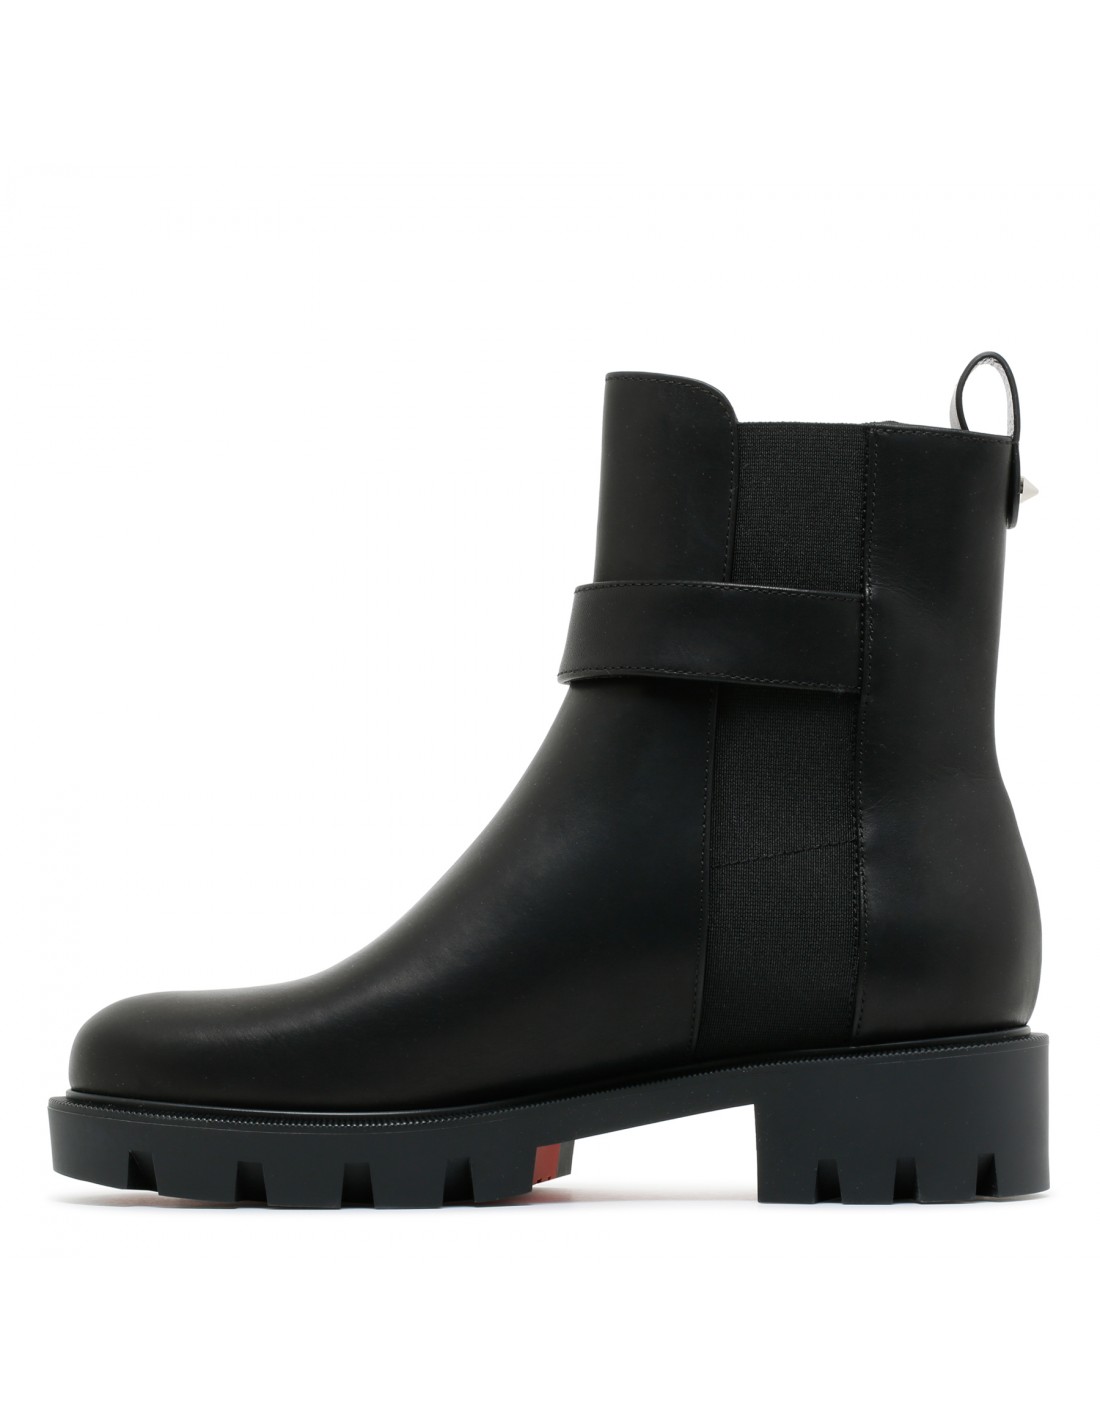 CL Chelsea Booty Lug boots